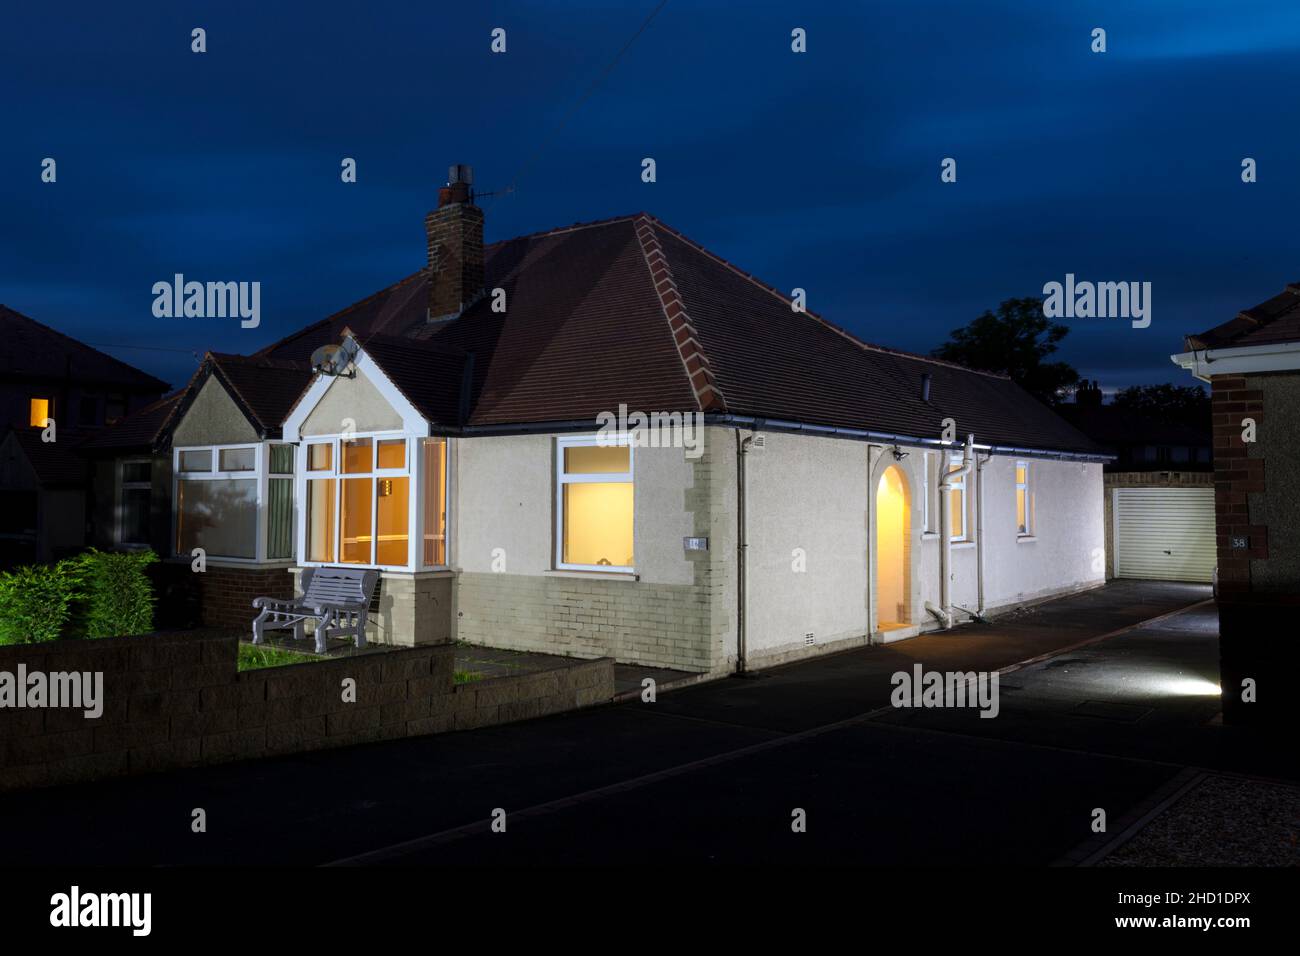 Bungalow on a street in Lancashire England lit up with lights at dusk Stock Photo